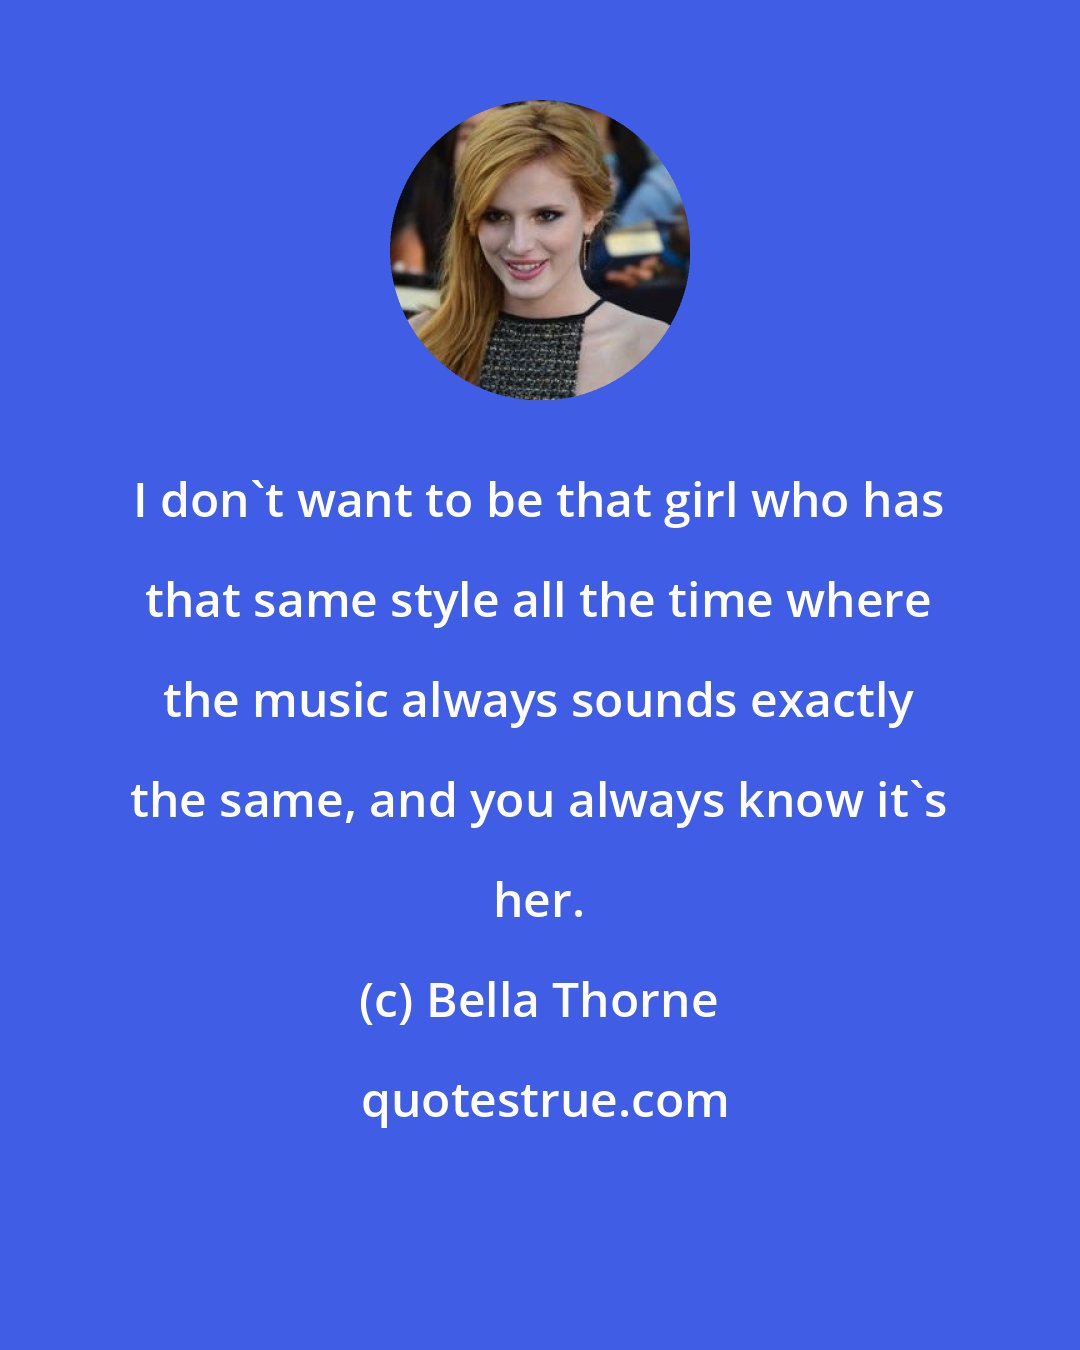 Bella Thorne: I don't want to be that girl who has that same style all the time where the music always sounds exactly the same, and you always know it's her.